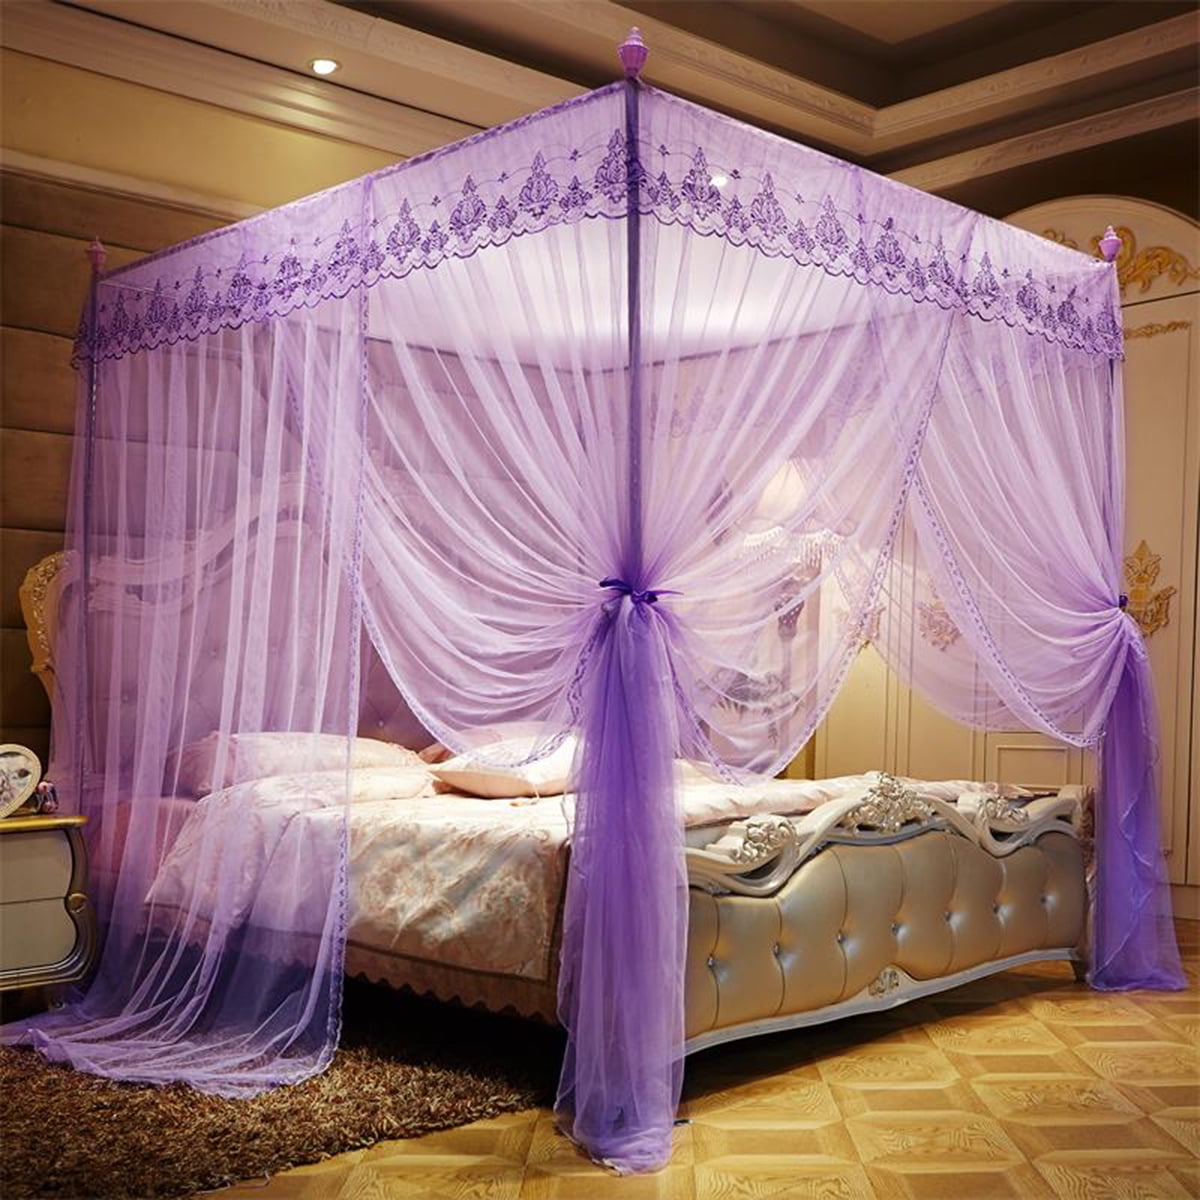 Four Corner Canopy Bed Curtains Princess Style Bed Canopy Bedroom